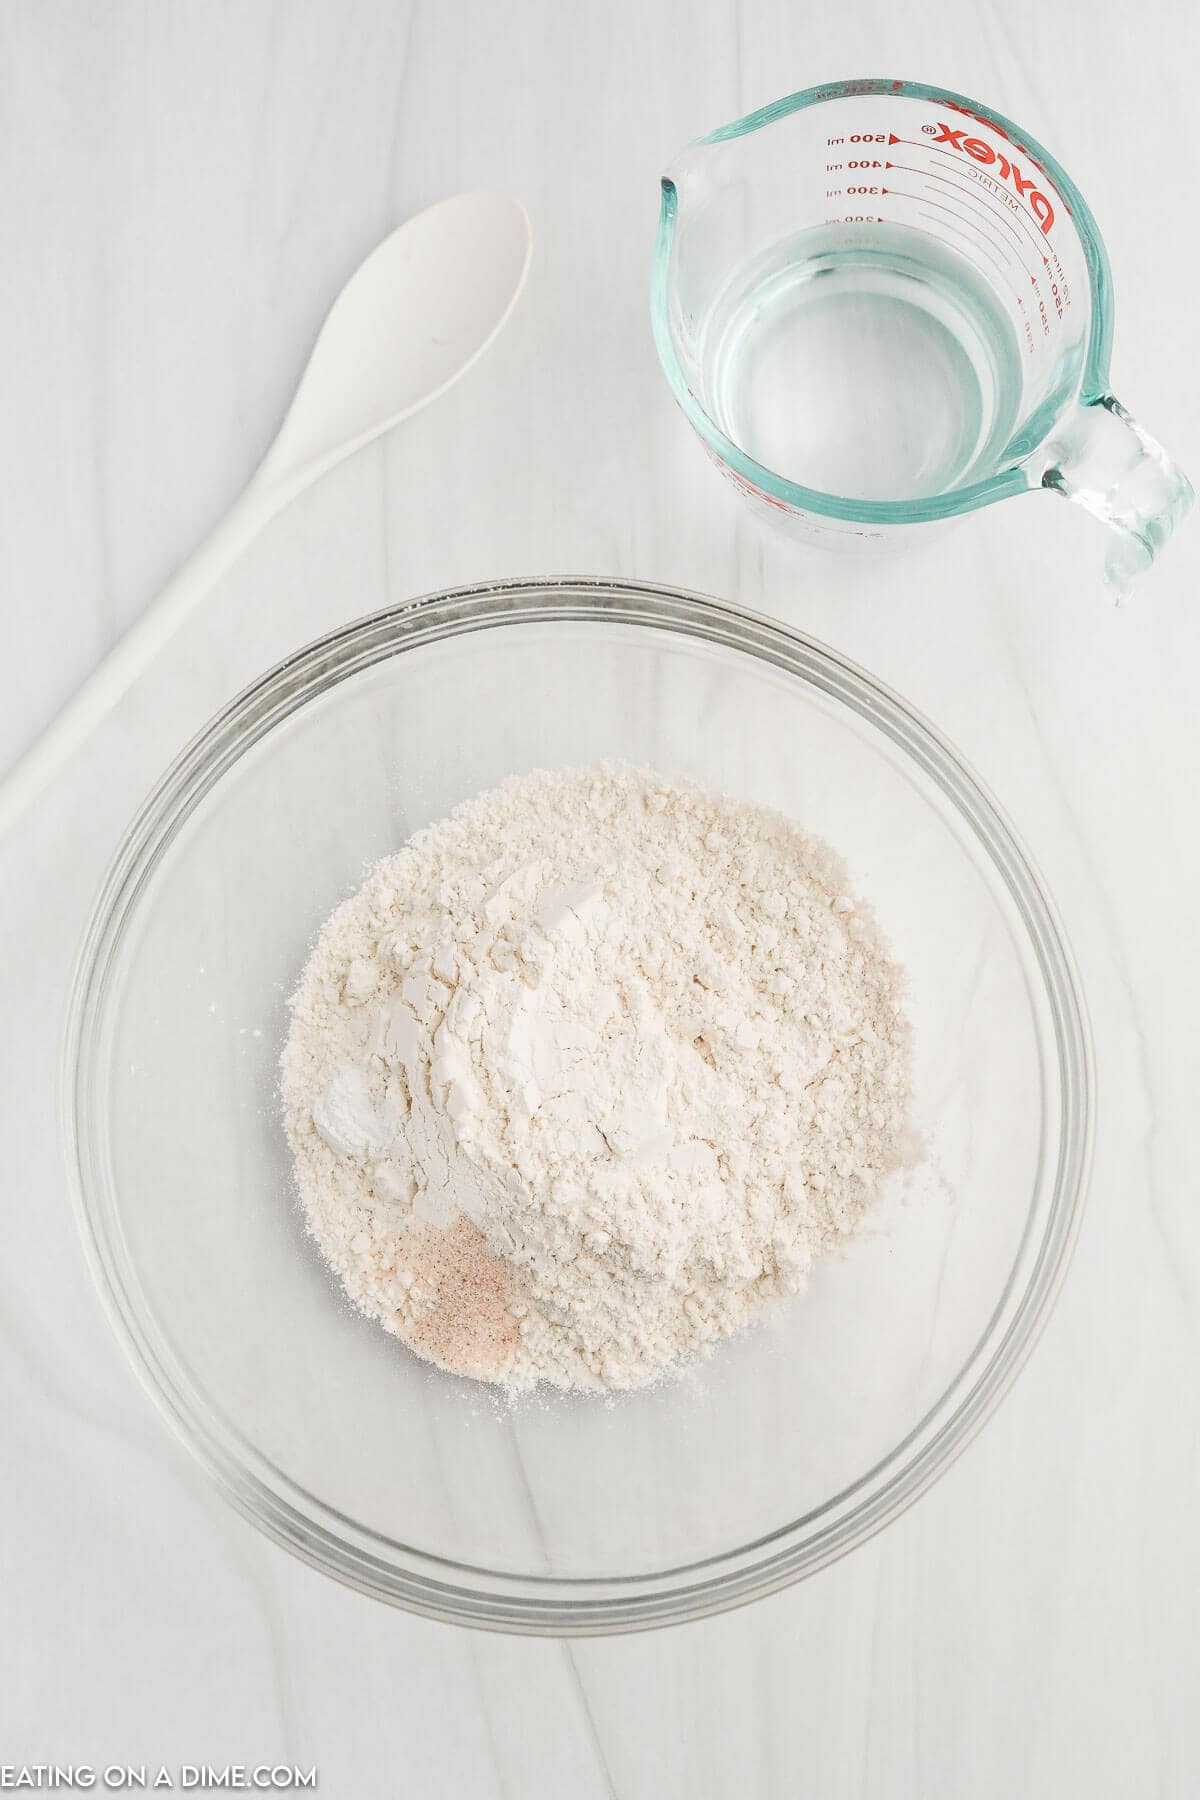 Combining the salt, flour, and baking powder together in a bowl 